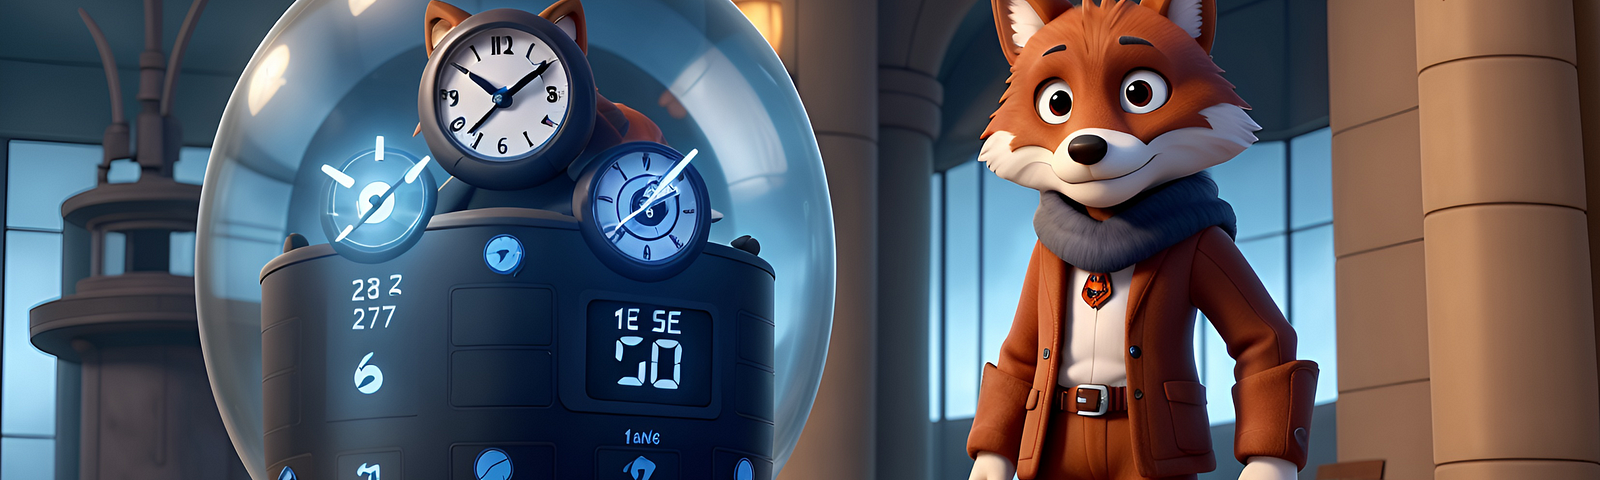 An AI-generated fox in the style of a Pixar 3D animation, wearing an orange jacket and orange pants with a grey scarf, standing next to machine encased in a glass sphere with several clock faces and symbols.